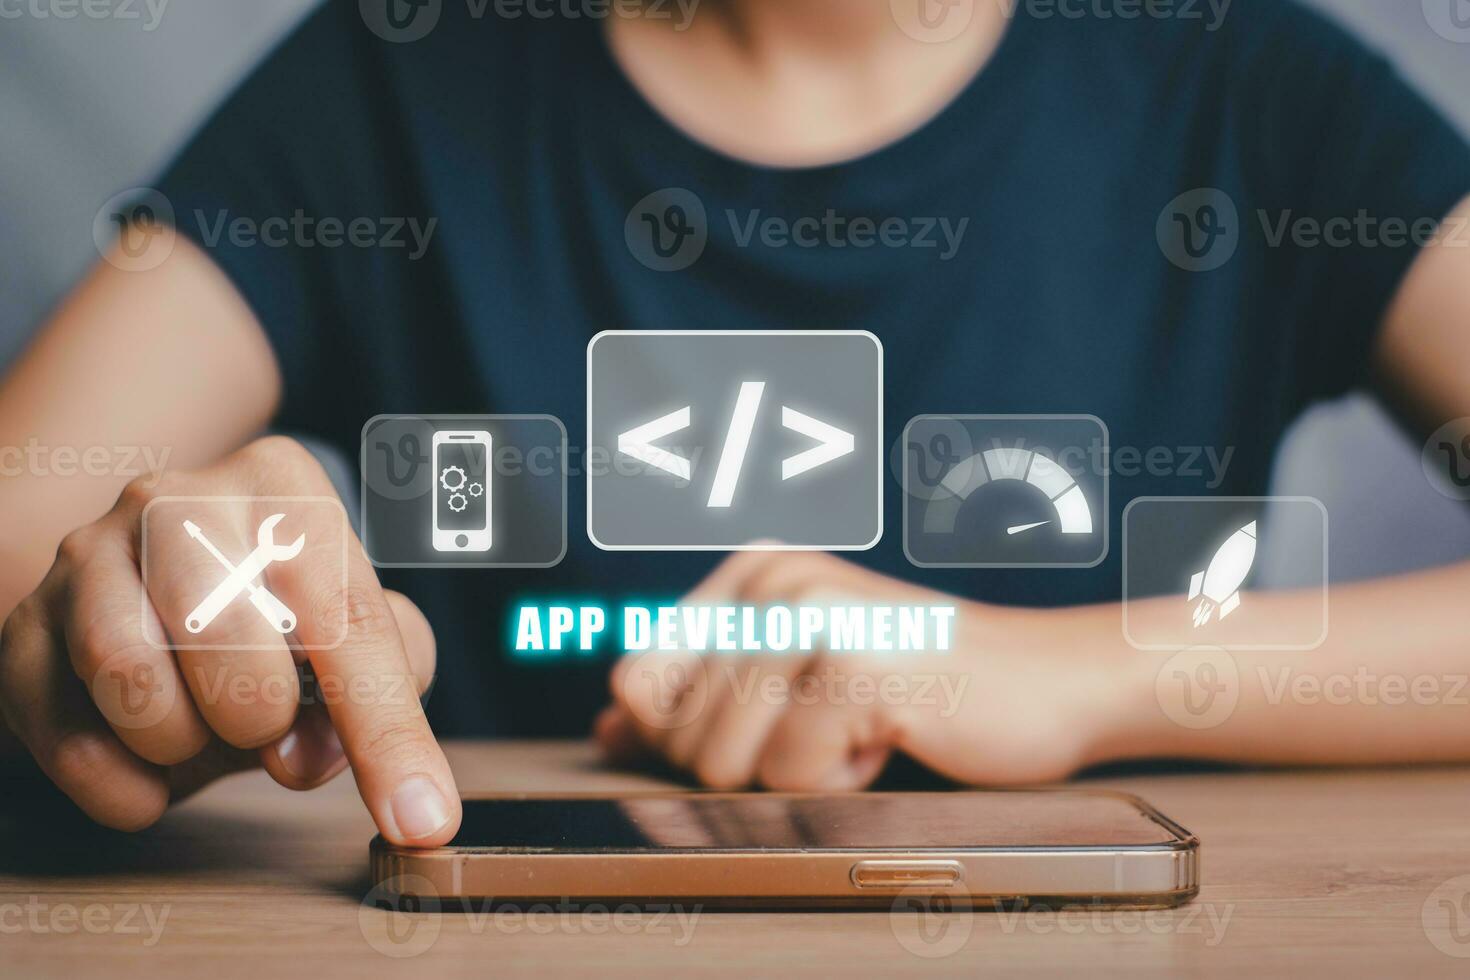 App development concept, Person hand using smart phone with app development icon on virtual screen background, Designing application for mobile phone. photo